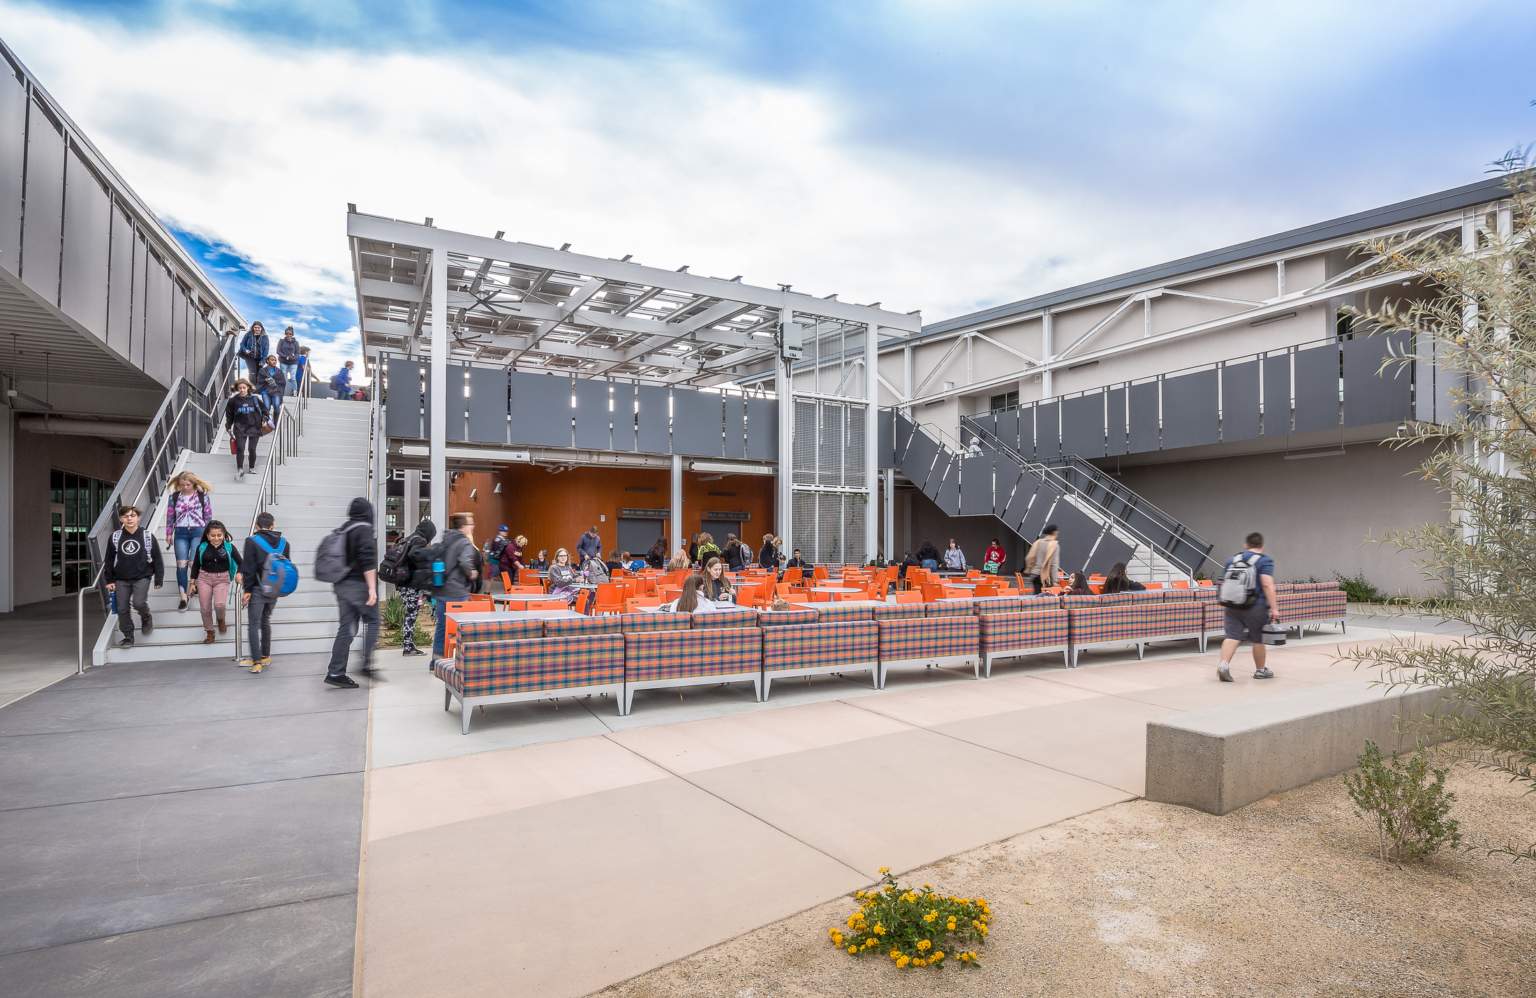 an outdoor learning area filled with orange seating shaded by solar canopies